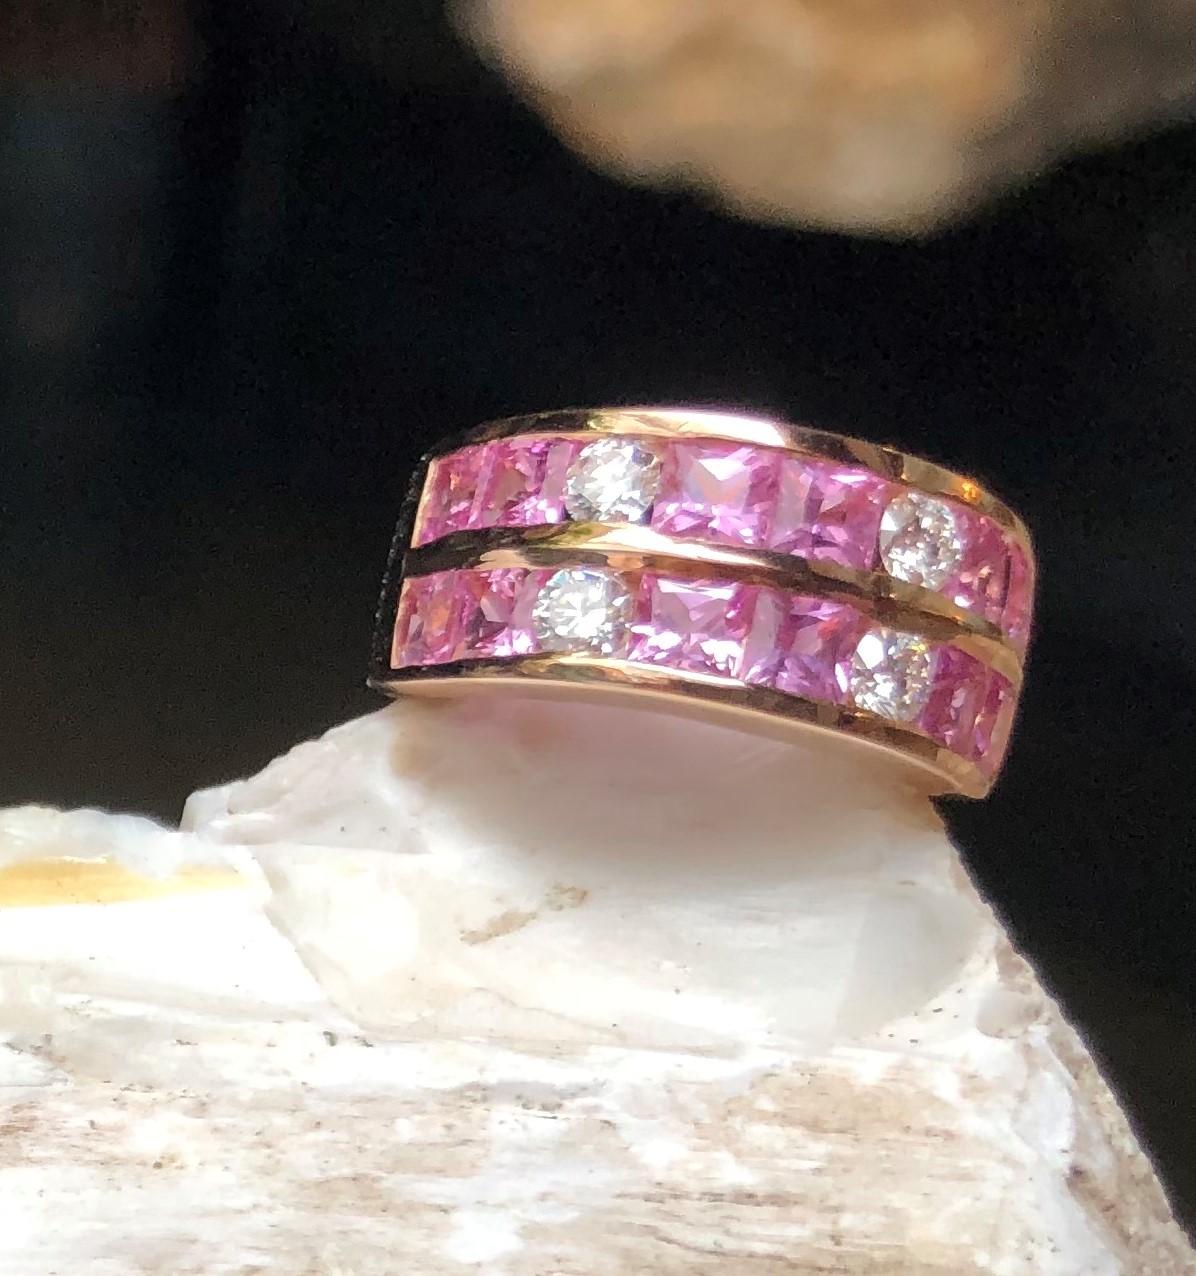 Pink Sapphire 3.15 carats with Diamond 0.49 carat Ring set in 18 Karat Rose Gold Settings

Width:  2.0 cm 
Length: 0.9 cm
Ring Size: 54
Total Weight: 10.16 grams

